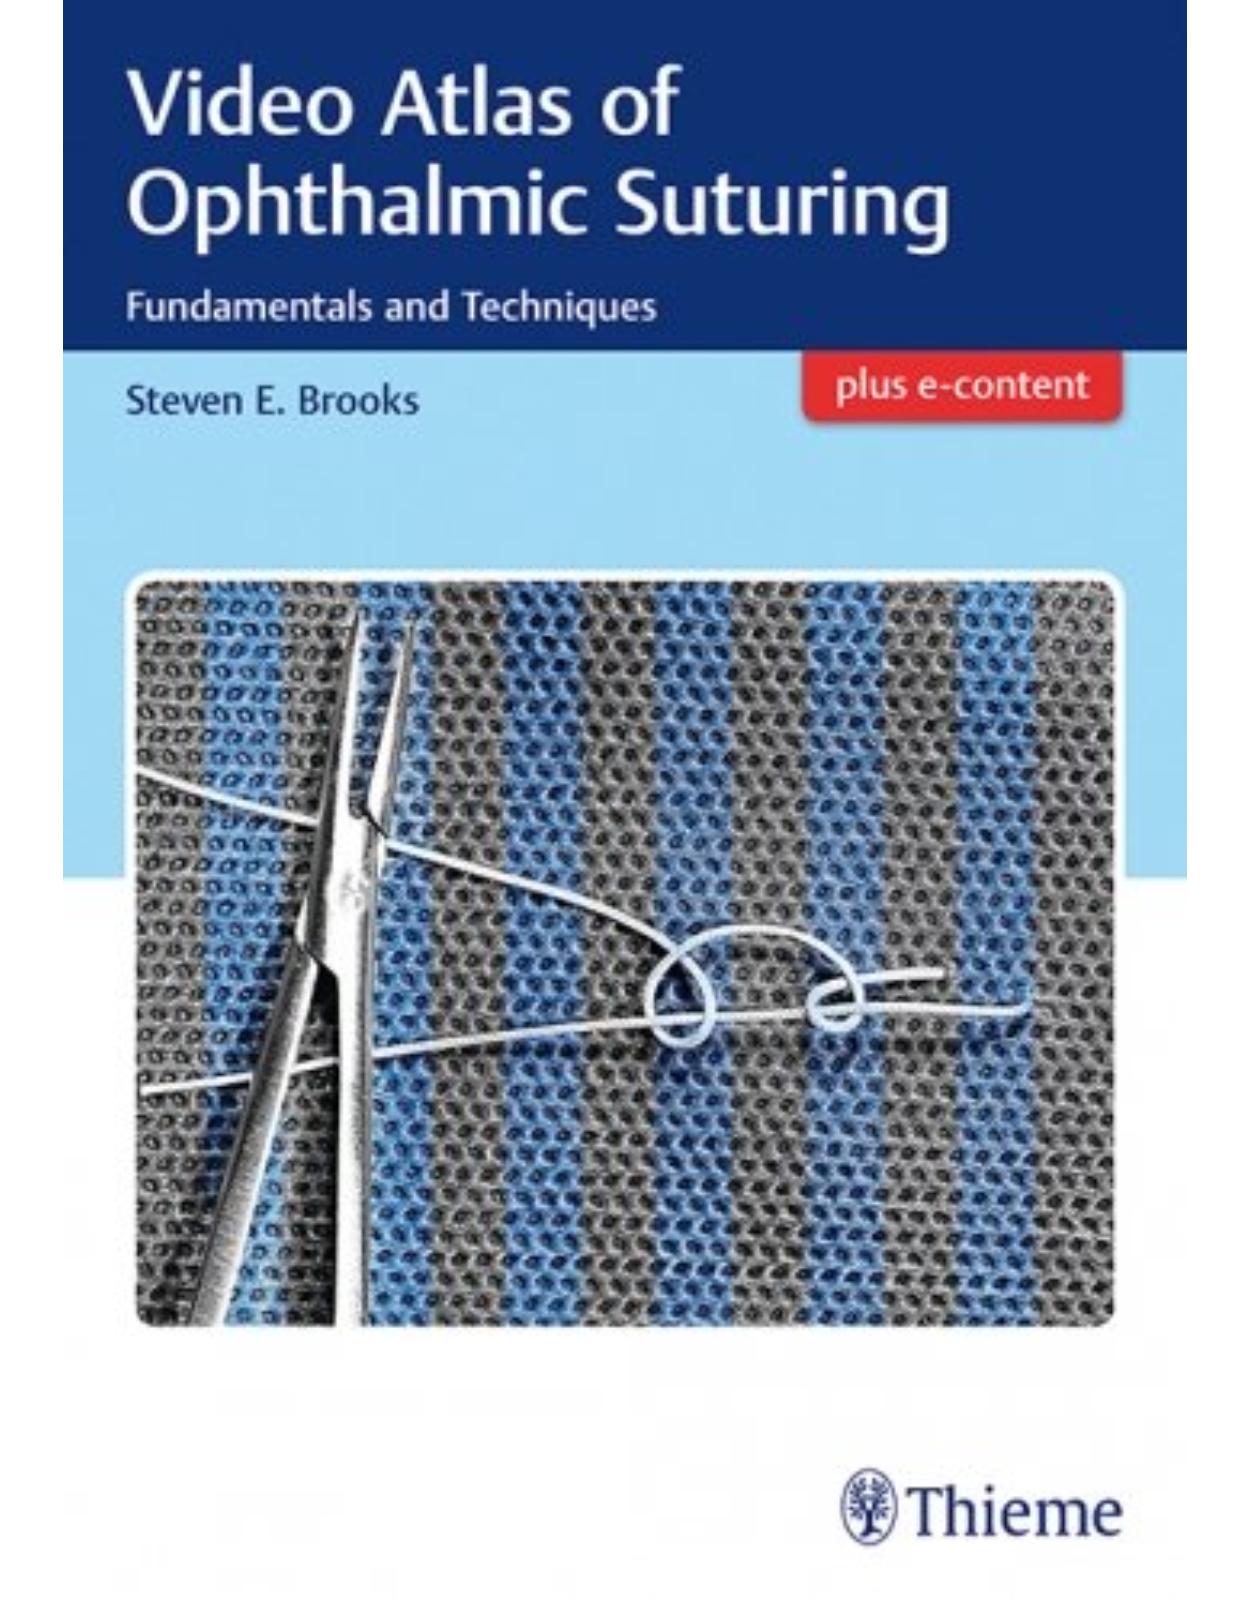 Video Atlas of Ophthalmic Suturing: Fundamentals and Techniques